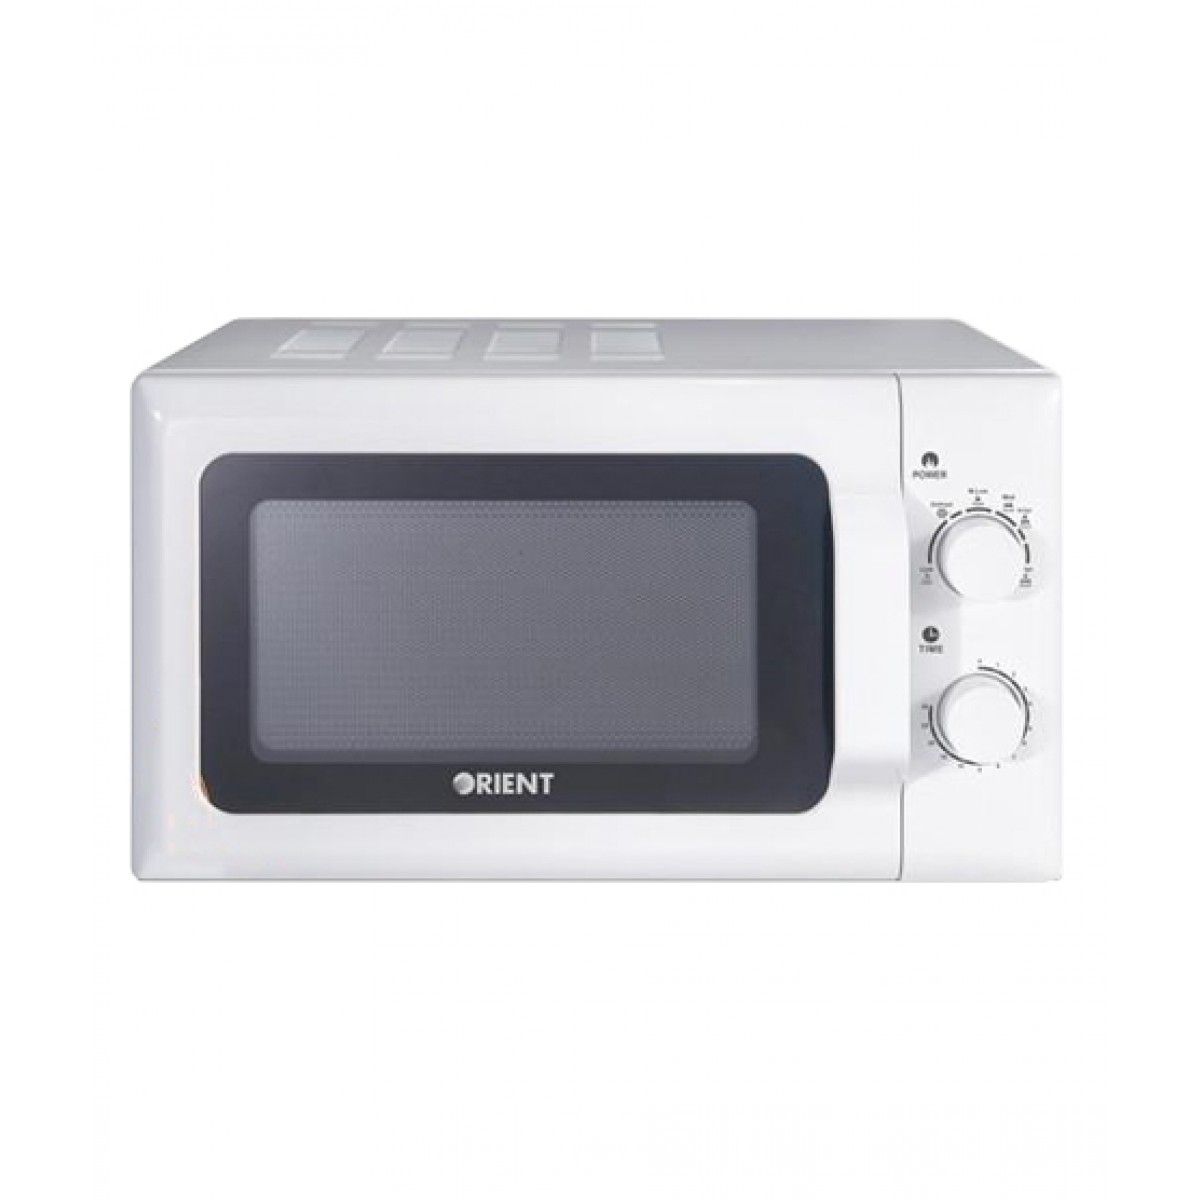 Orient OMG-20MOWS Olive Microwave Oven